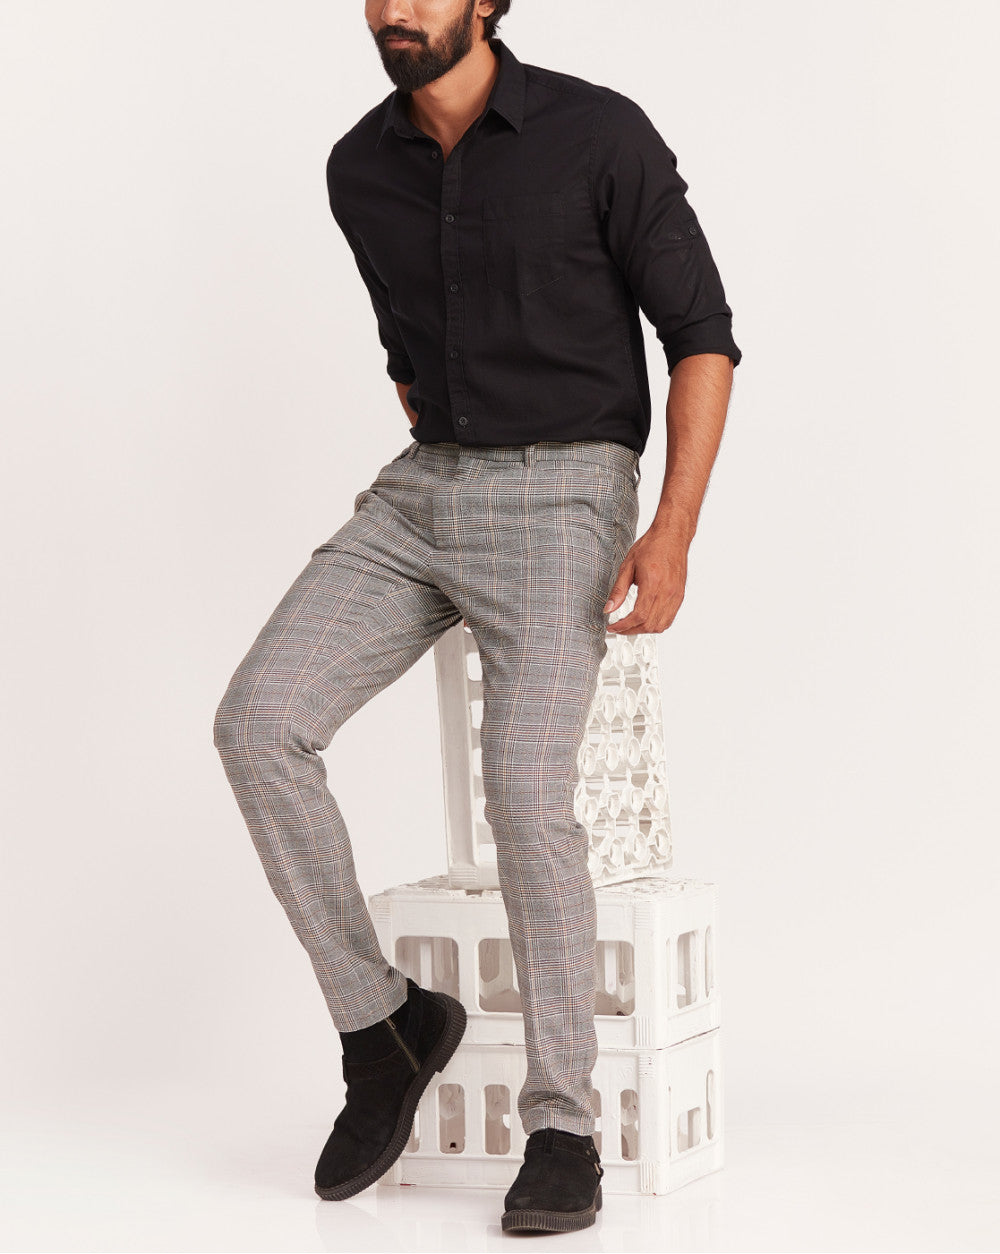 Tapered Fit Pleated Plaid Chinos - Winter Sun Checks